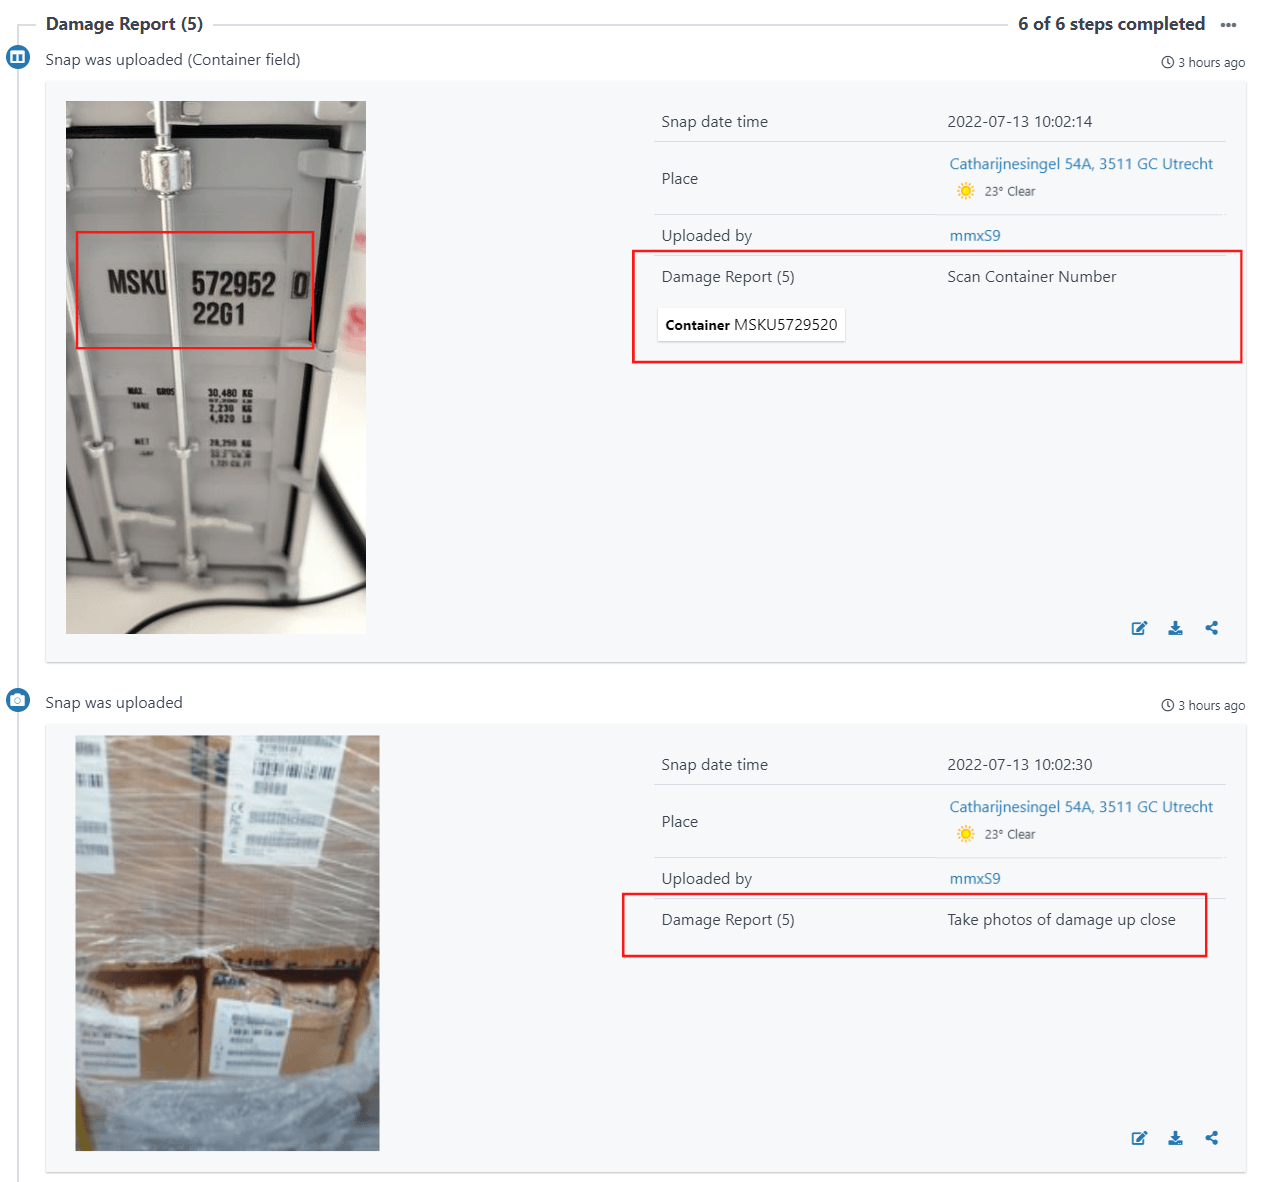 Scan container number